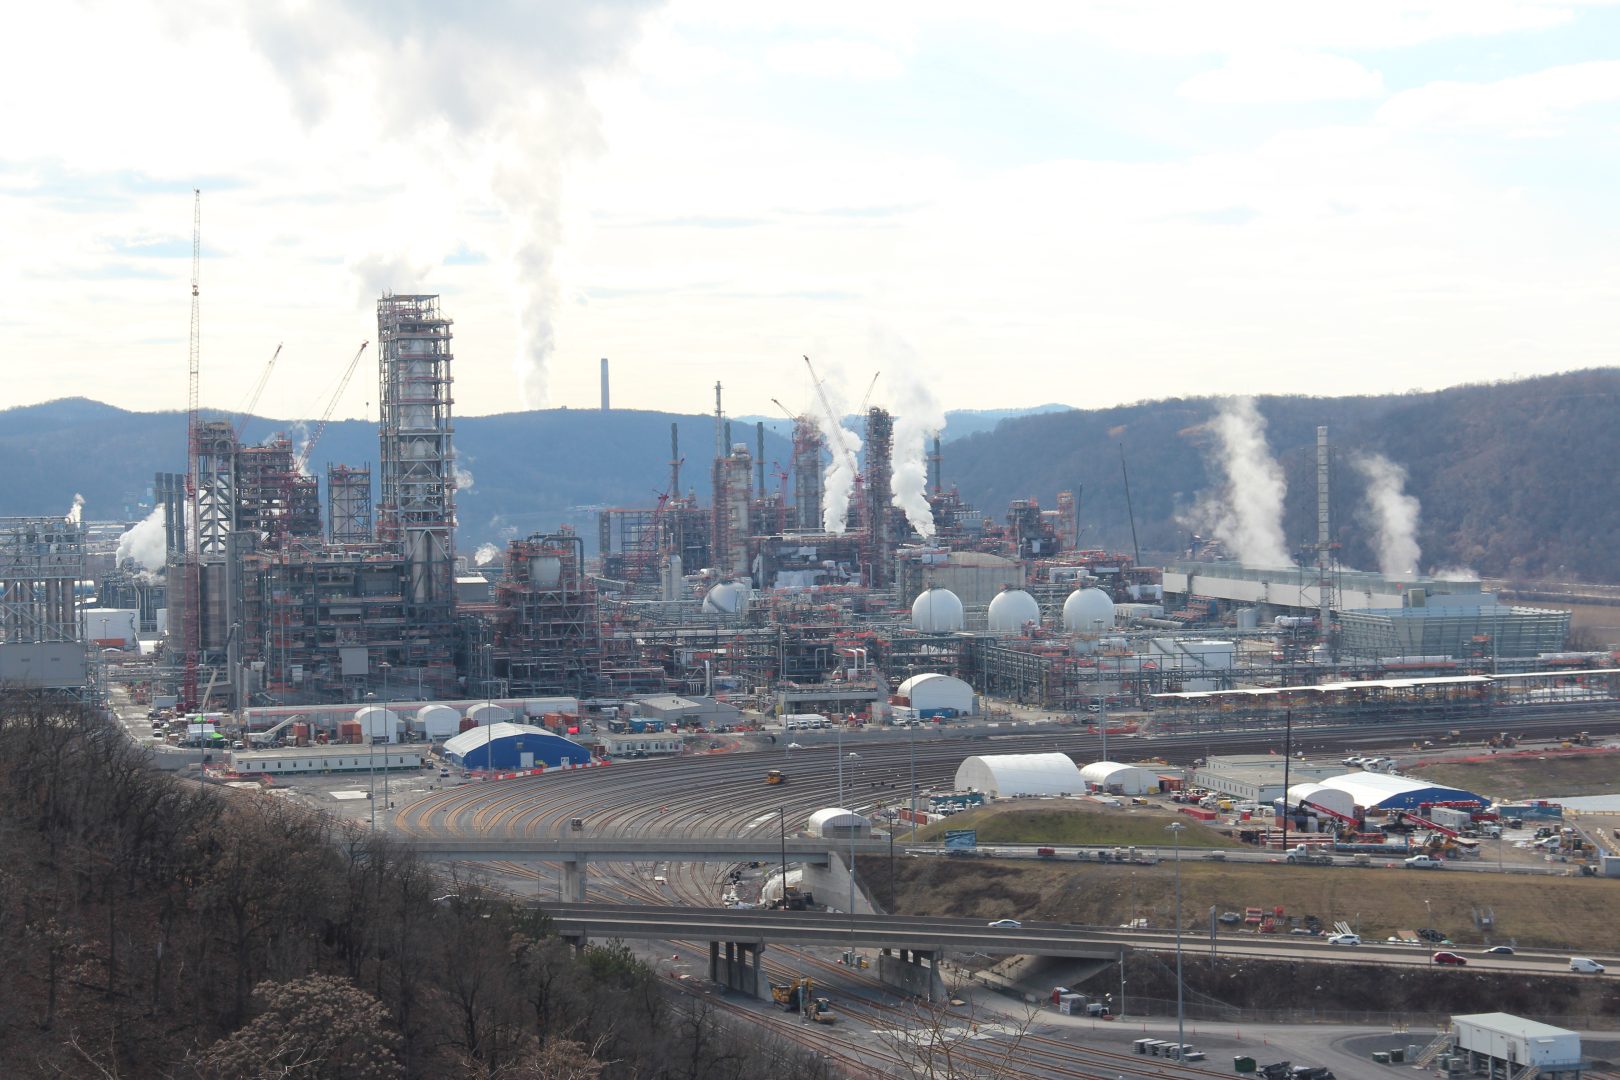 Report: Predicted Ohio Valley Petrochemical Hub Never Materialized